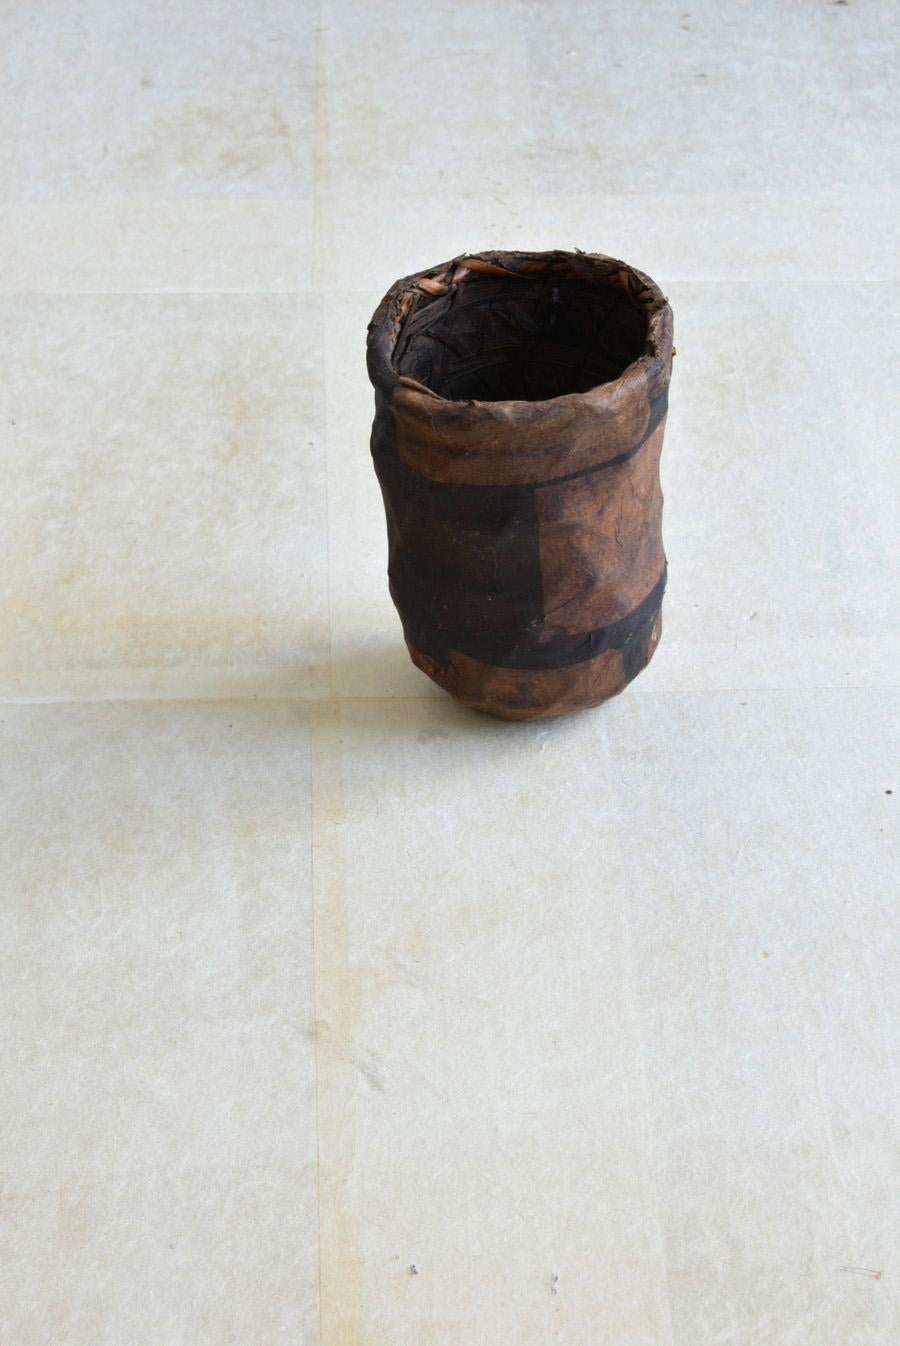 Hand-Crafted Japanese Antique Flower Vase with Paper Pasted on It./1868-1920/Wabi-Sabi Object